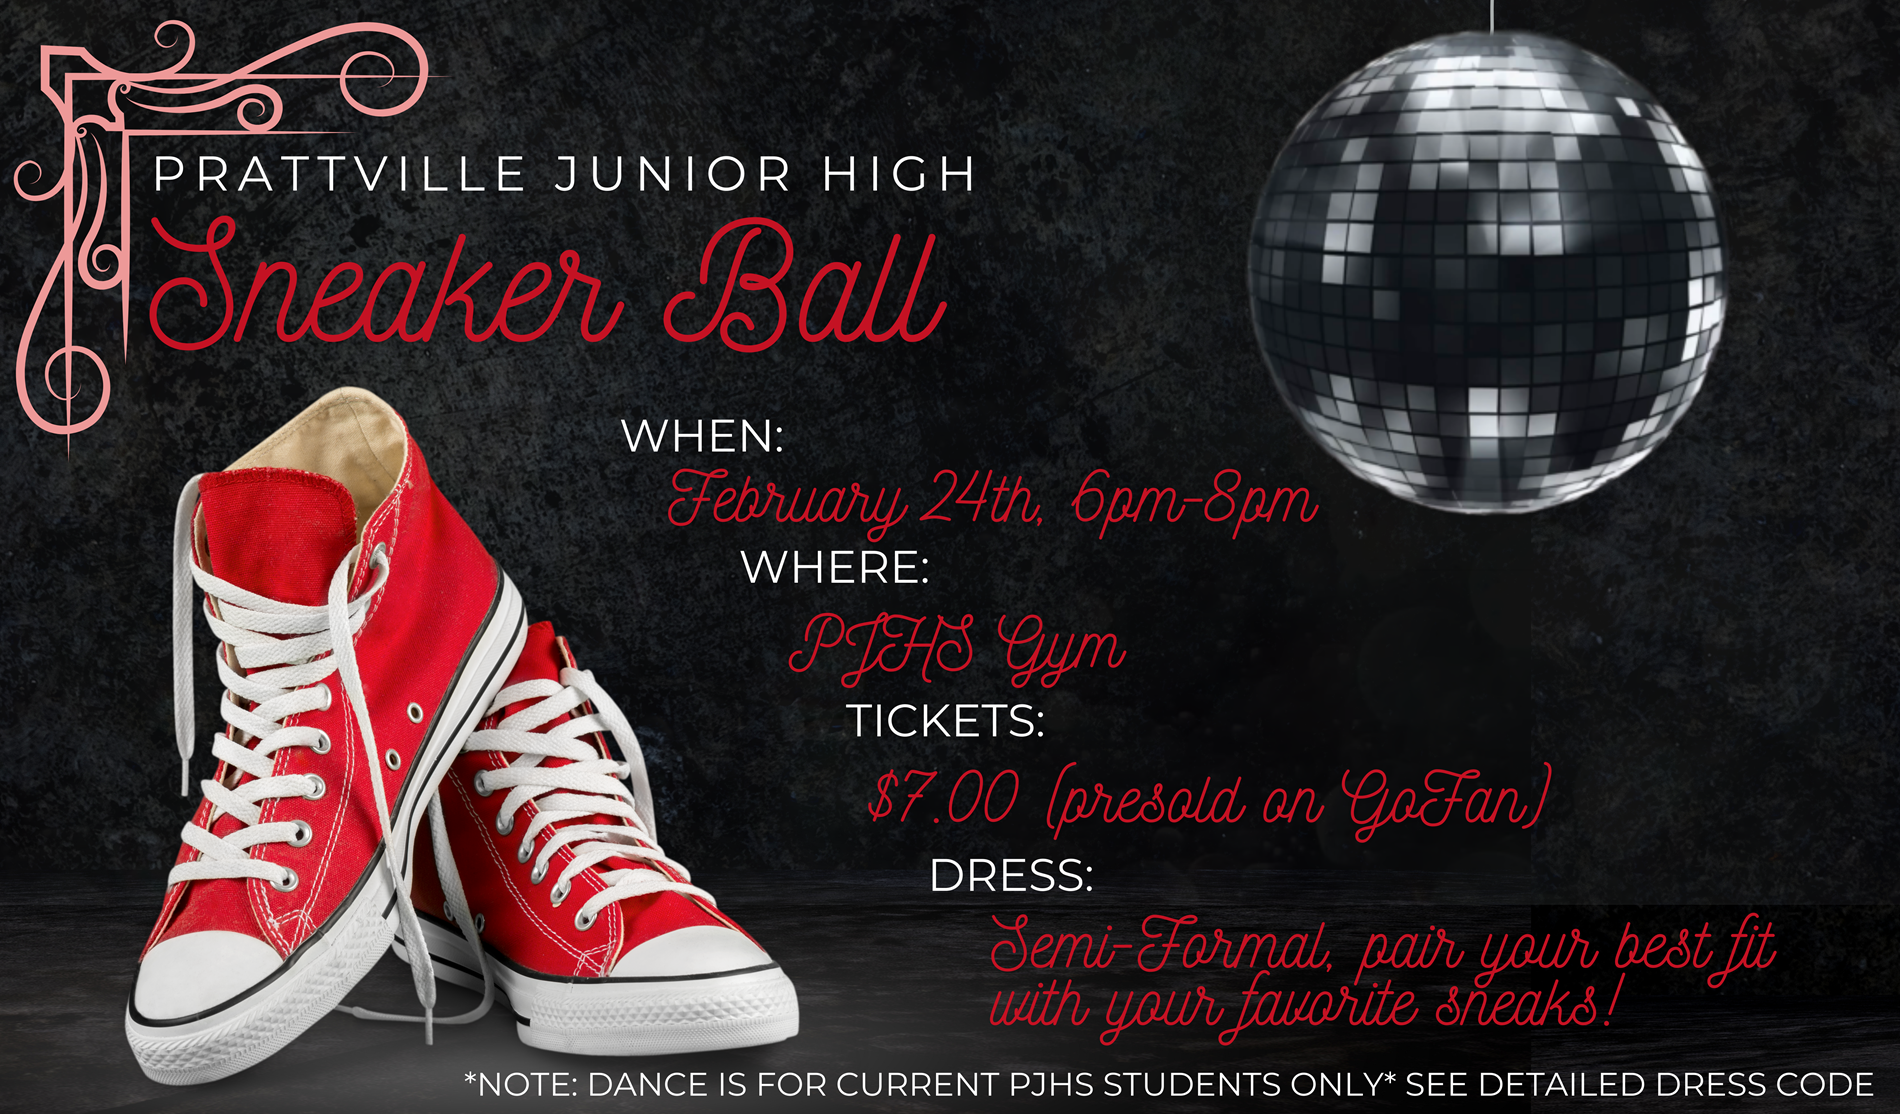 Prattville High school valentines sneakers ball February 24th 6-8 pjhs gym semi formal wear your sneakers with your fancy clothes